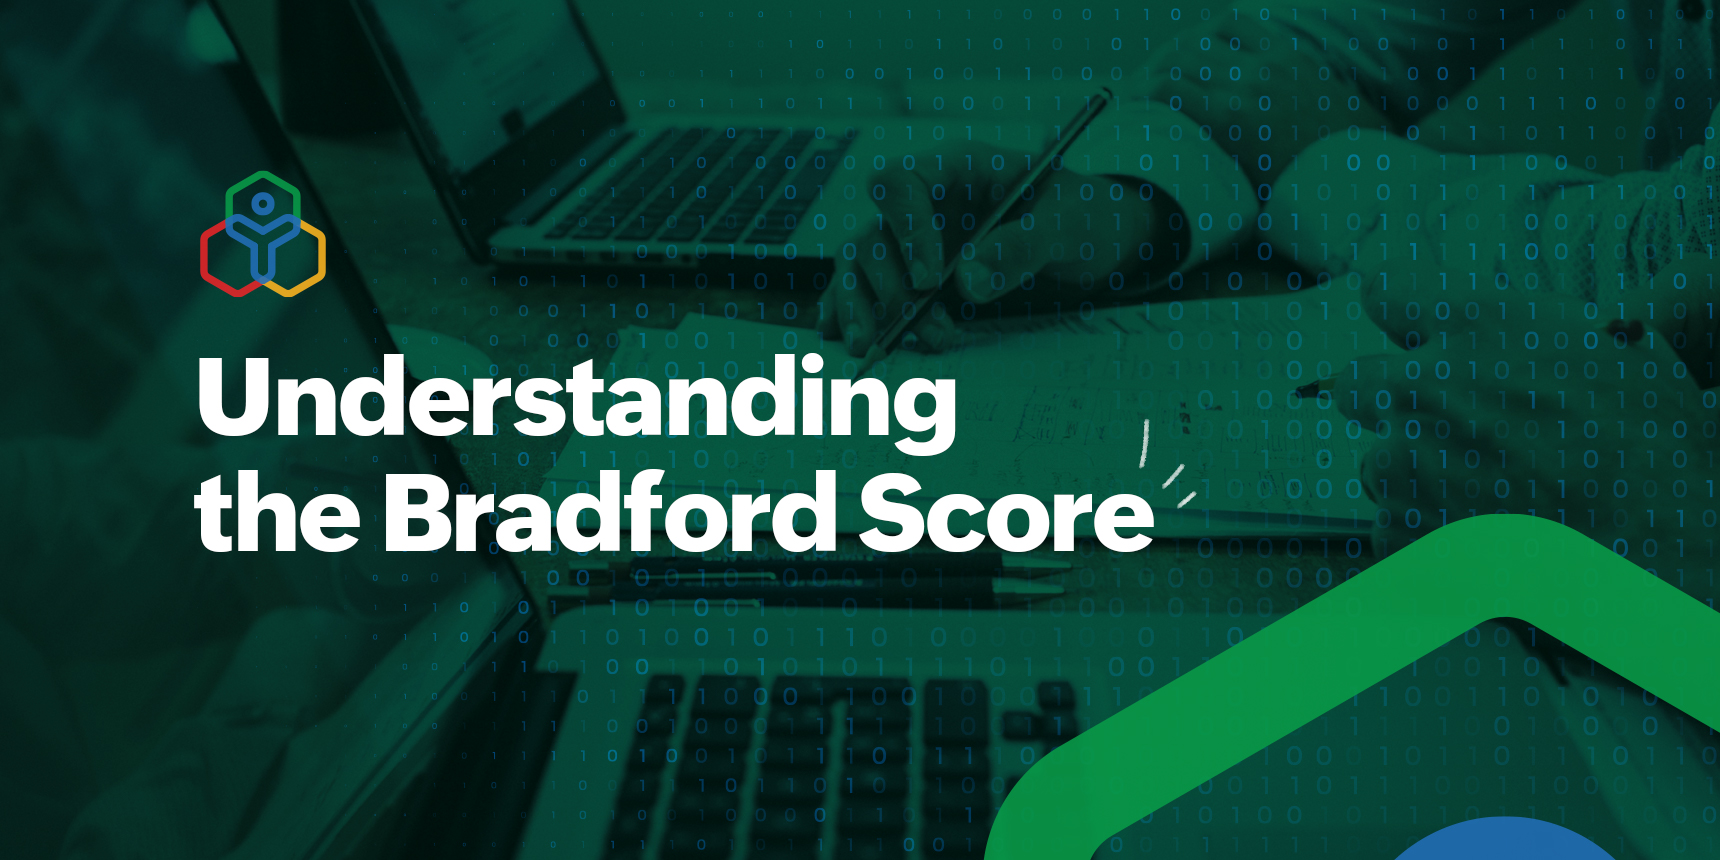 Reduce unplanned absences with the Bradford Score